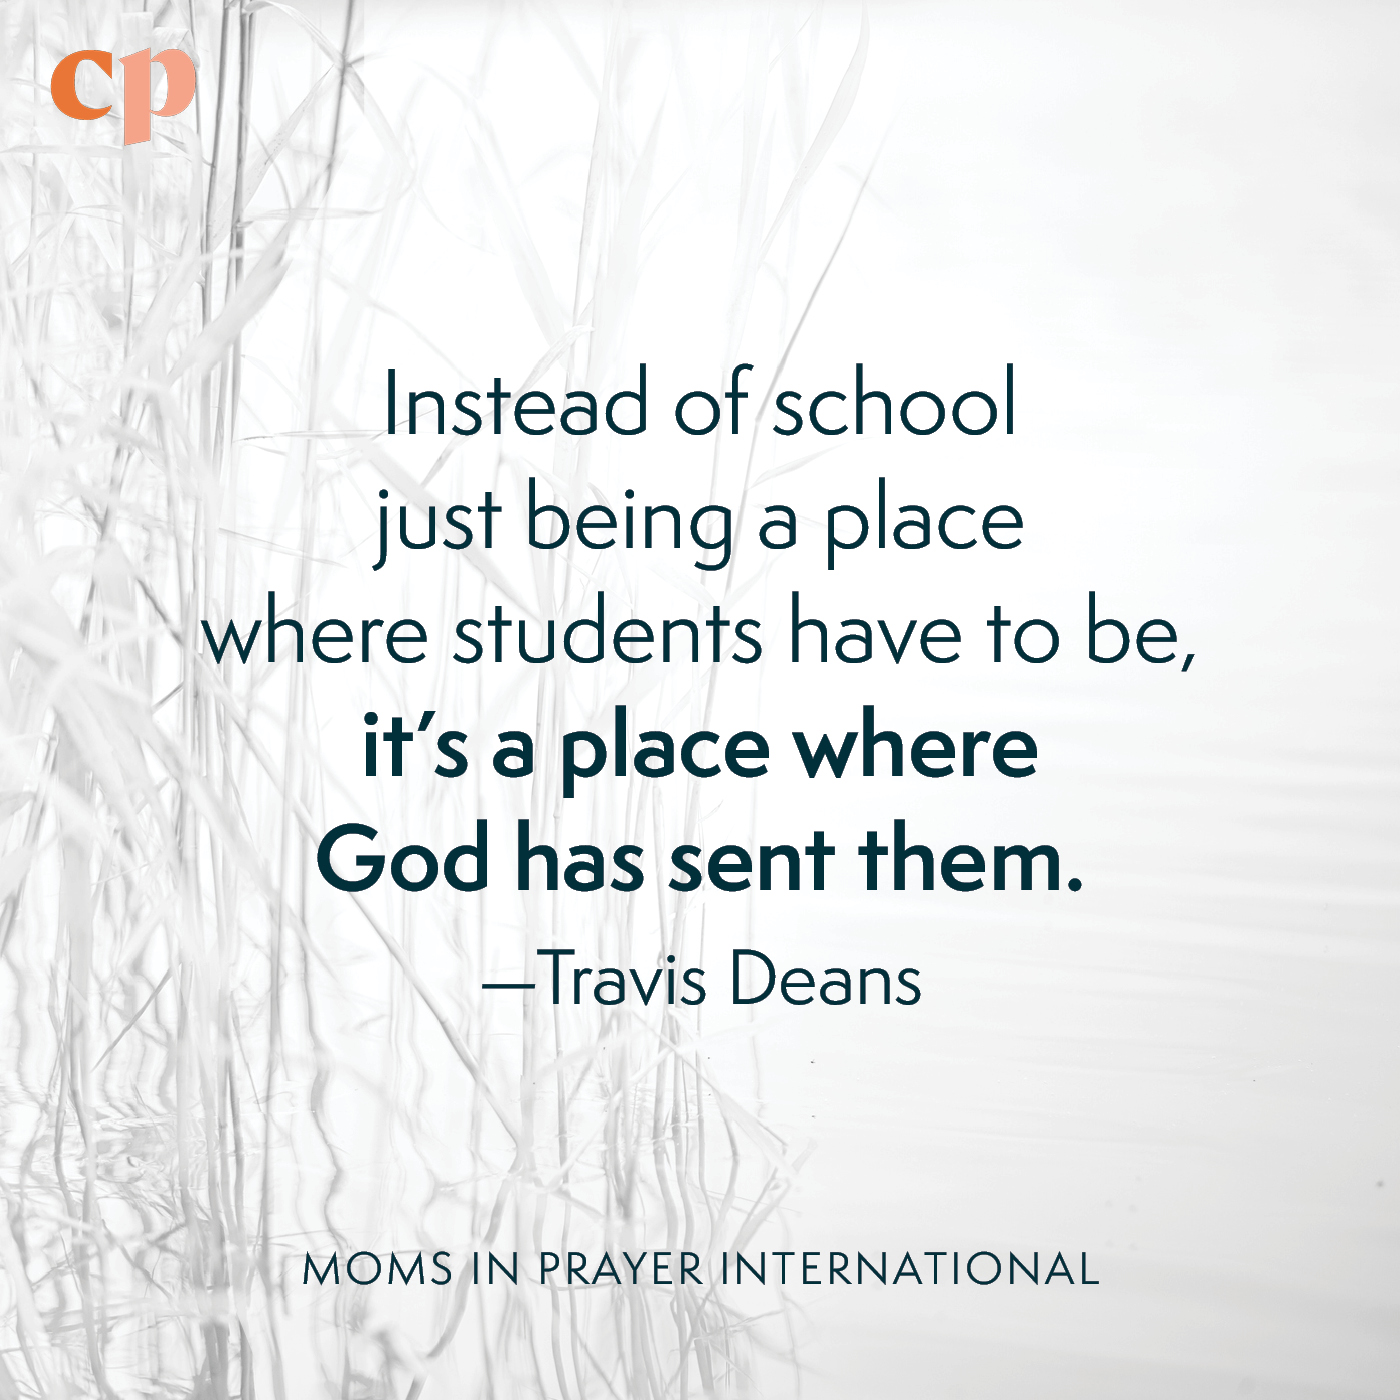 Student missions on campus, prayer for schools